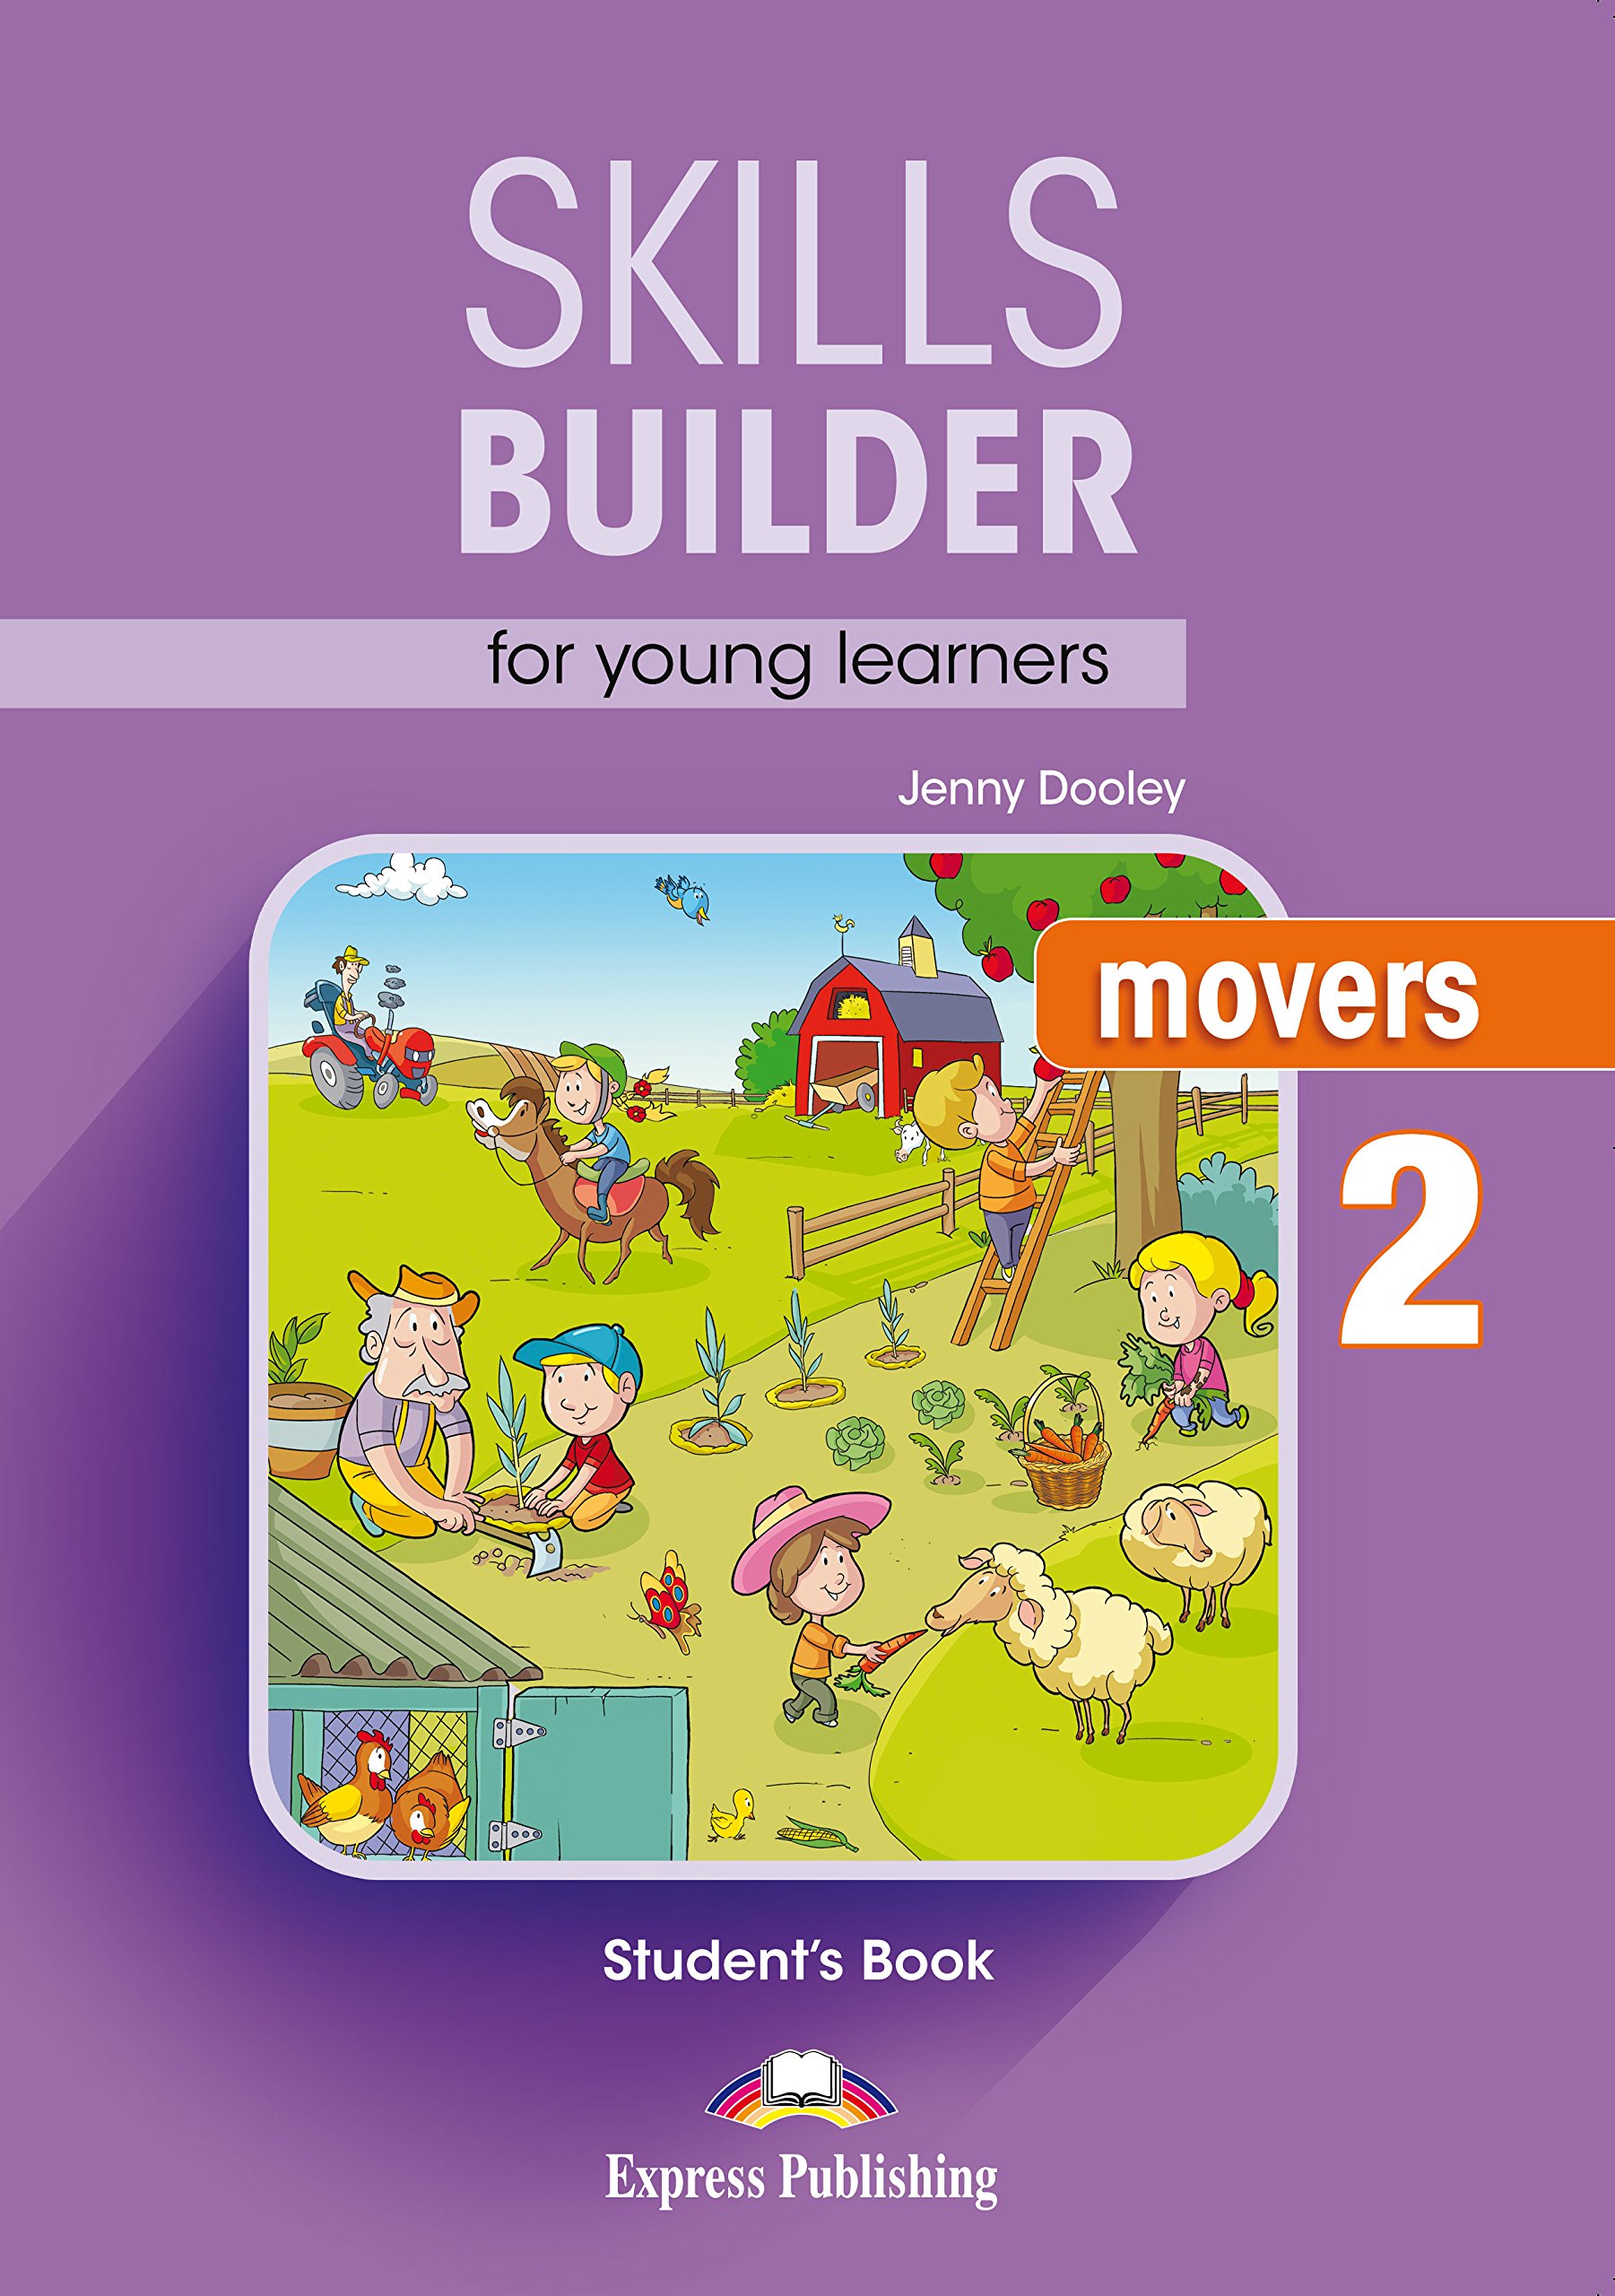 Skills Builder for young learners, MOVERS 2 Student's Book